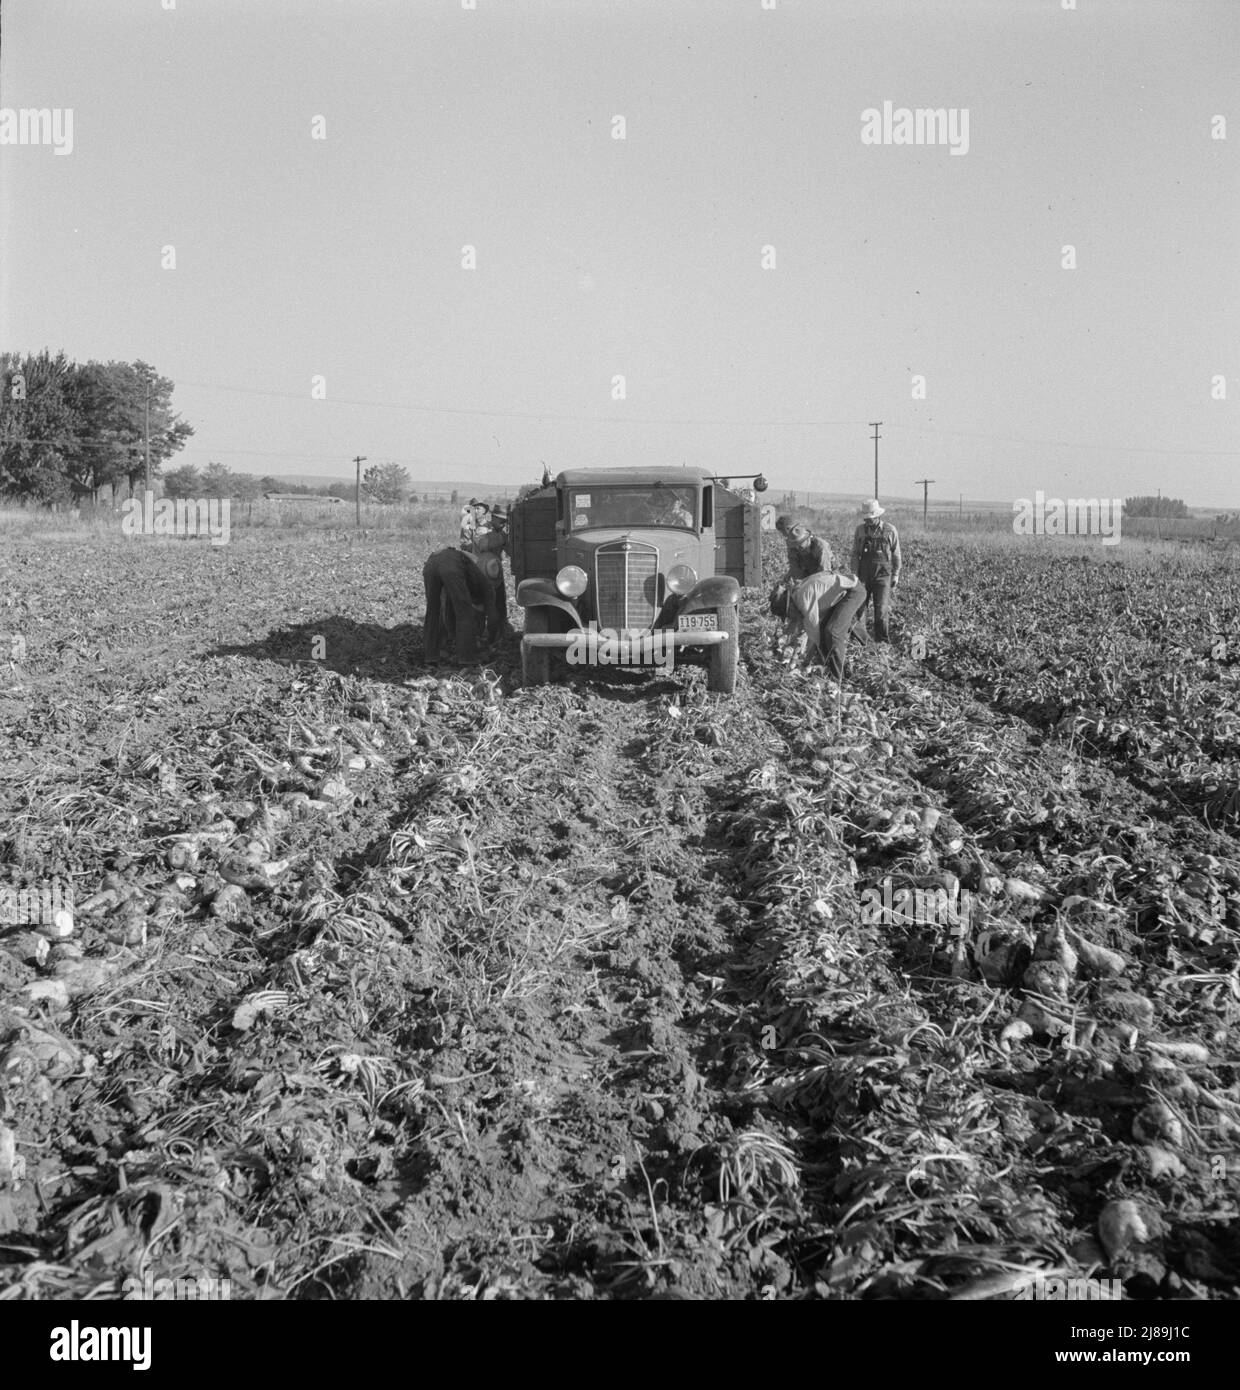 Loading truck in sugar beet field. Average wage of field worker: two dollars and fifty cents per day and dinner and supper during topping. Near Ontario, Malheur County, Oregon. Stock Photo